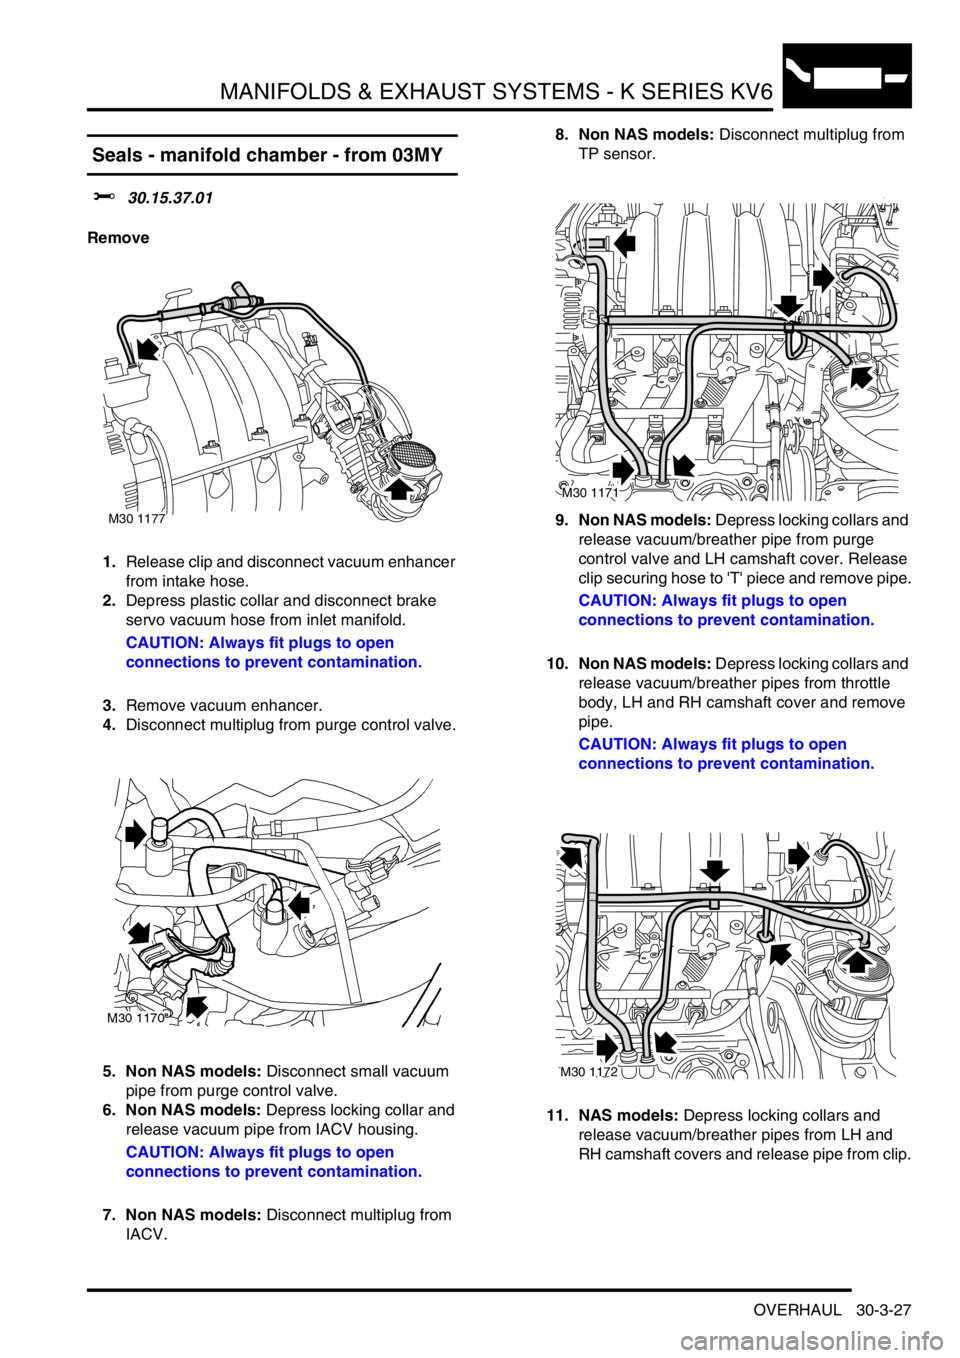 LAND ROVER FREELANDER 2001 User Guide MANIFOLDS & EXHAUST SYSTEMS - K SERIES KV6
OVERHAUL 30-3-27
 Seals - manifold chamber - from 03MY
$% 30.15.37.01
Remove
1.Release clip and disconnect vacuum enhancer 
from intake hose.
2.Depress plast